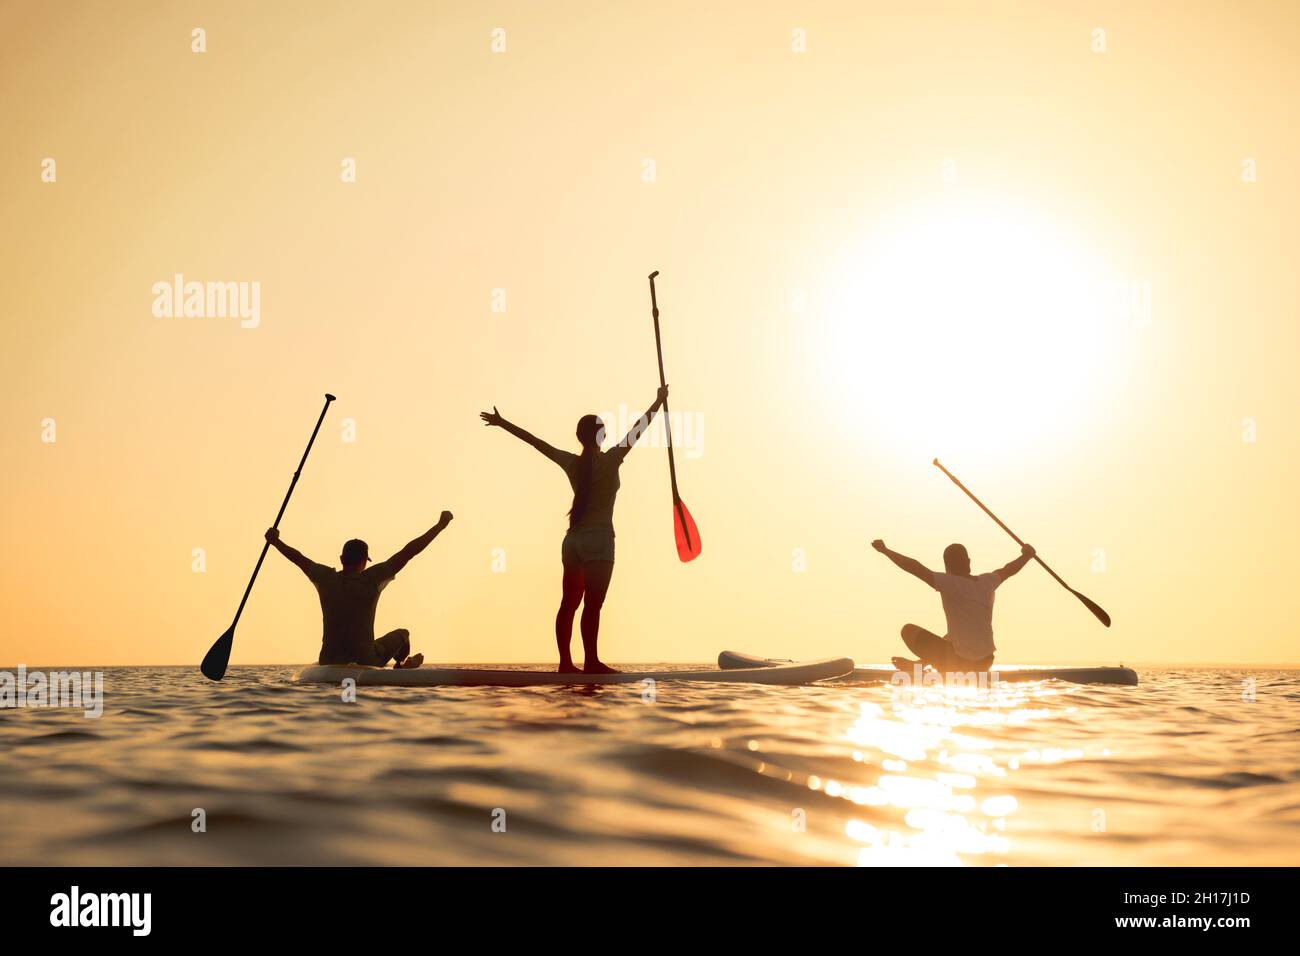 Happy surfers stands on sup boards with raised arms and looks at sunset Stock Photo